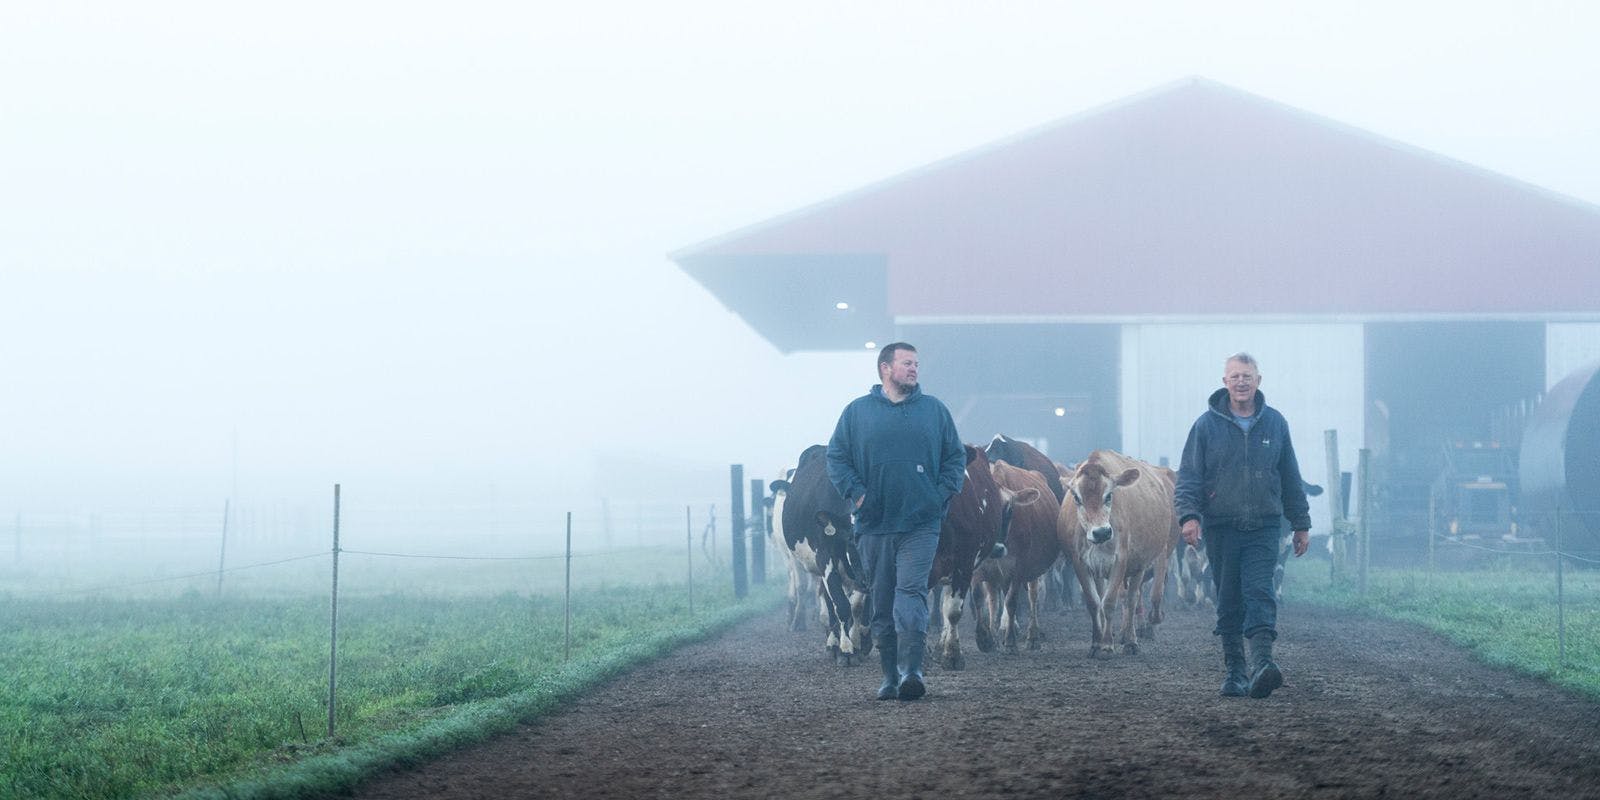 Dennis and William Baese of Michigan lead their cows out to pasture on a foggy morning.